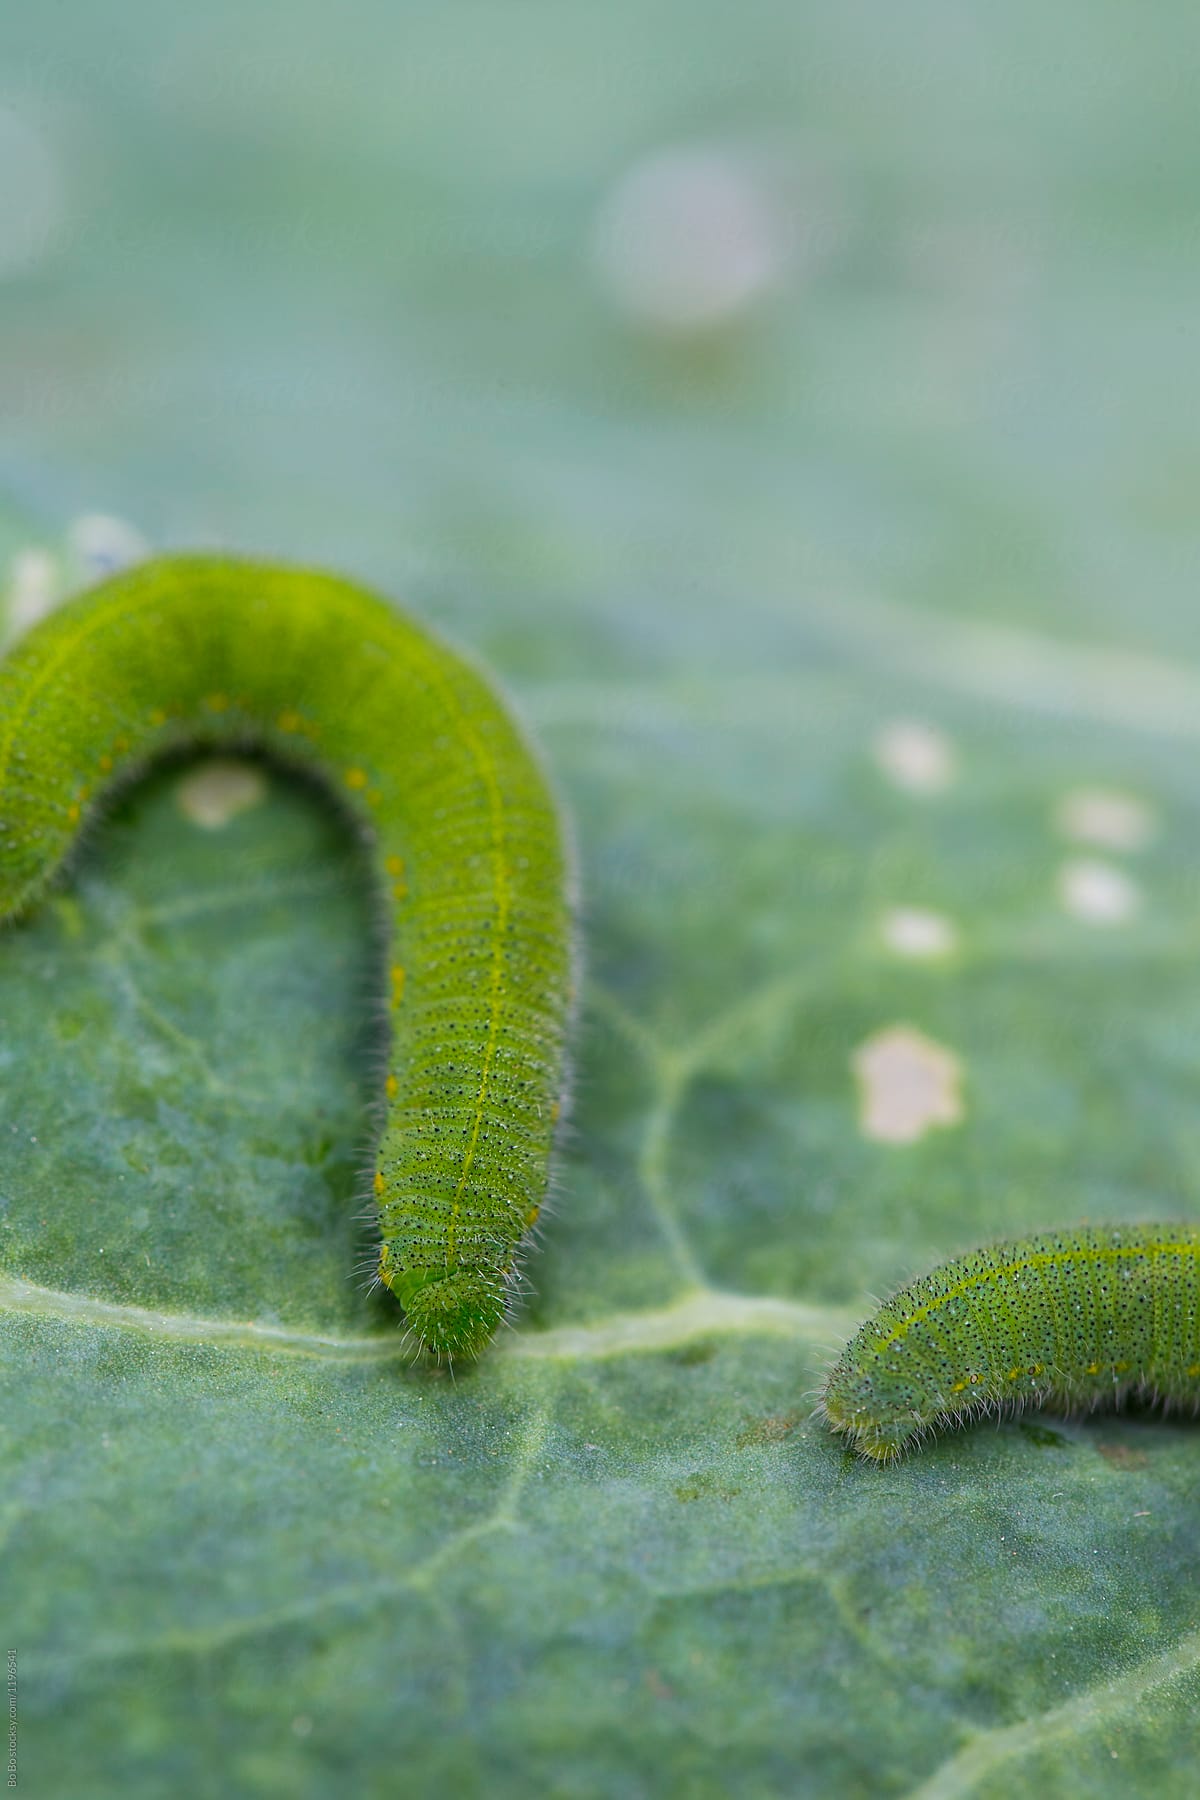 green worm on cabbage leaf